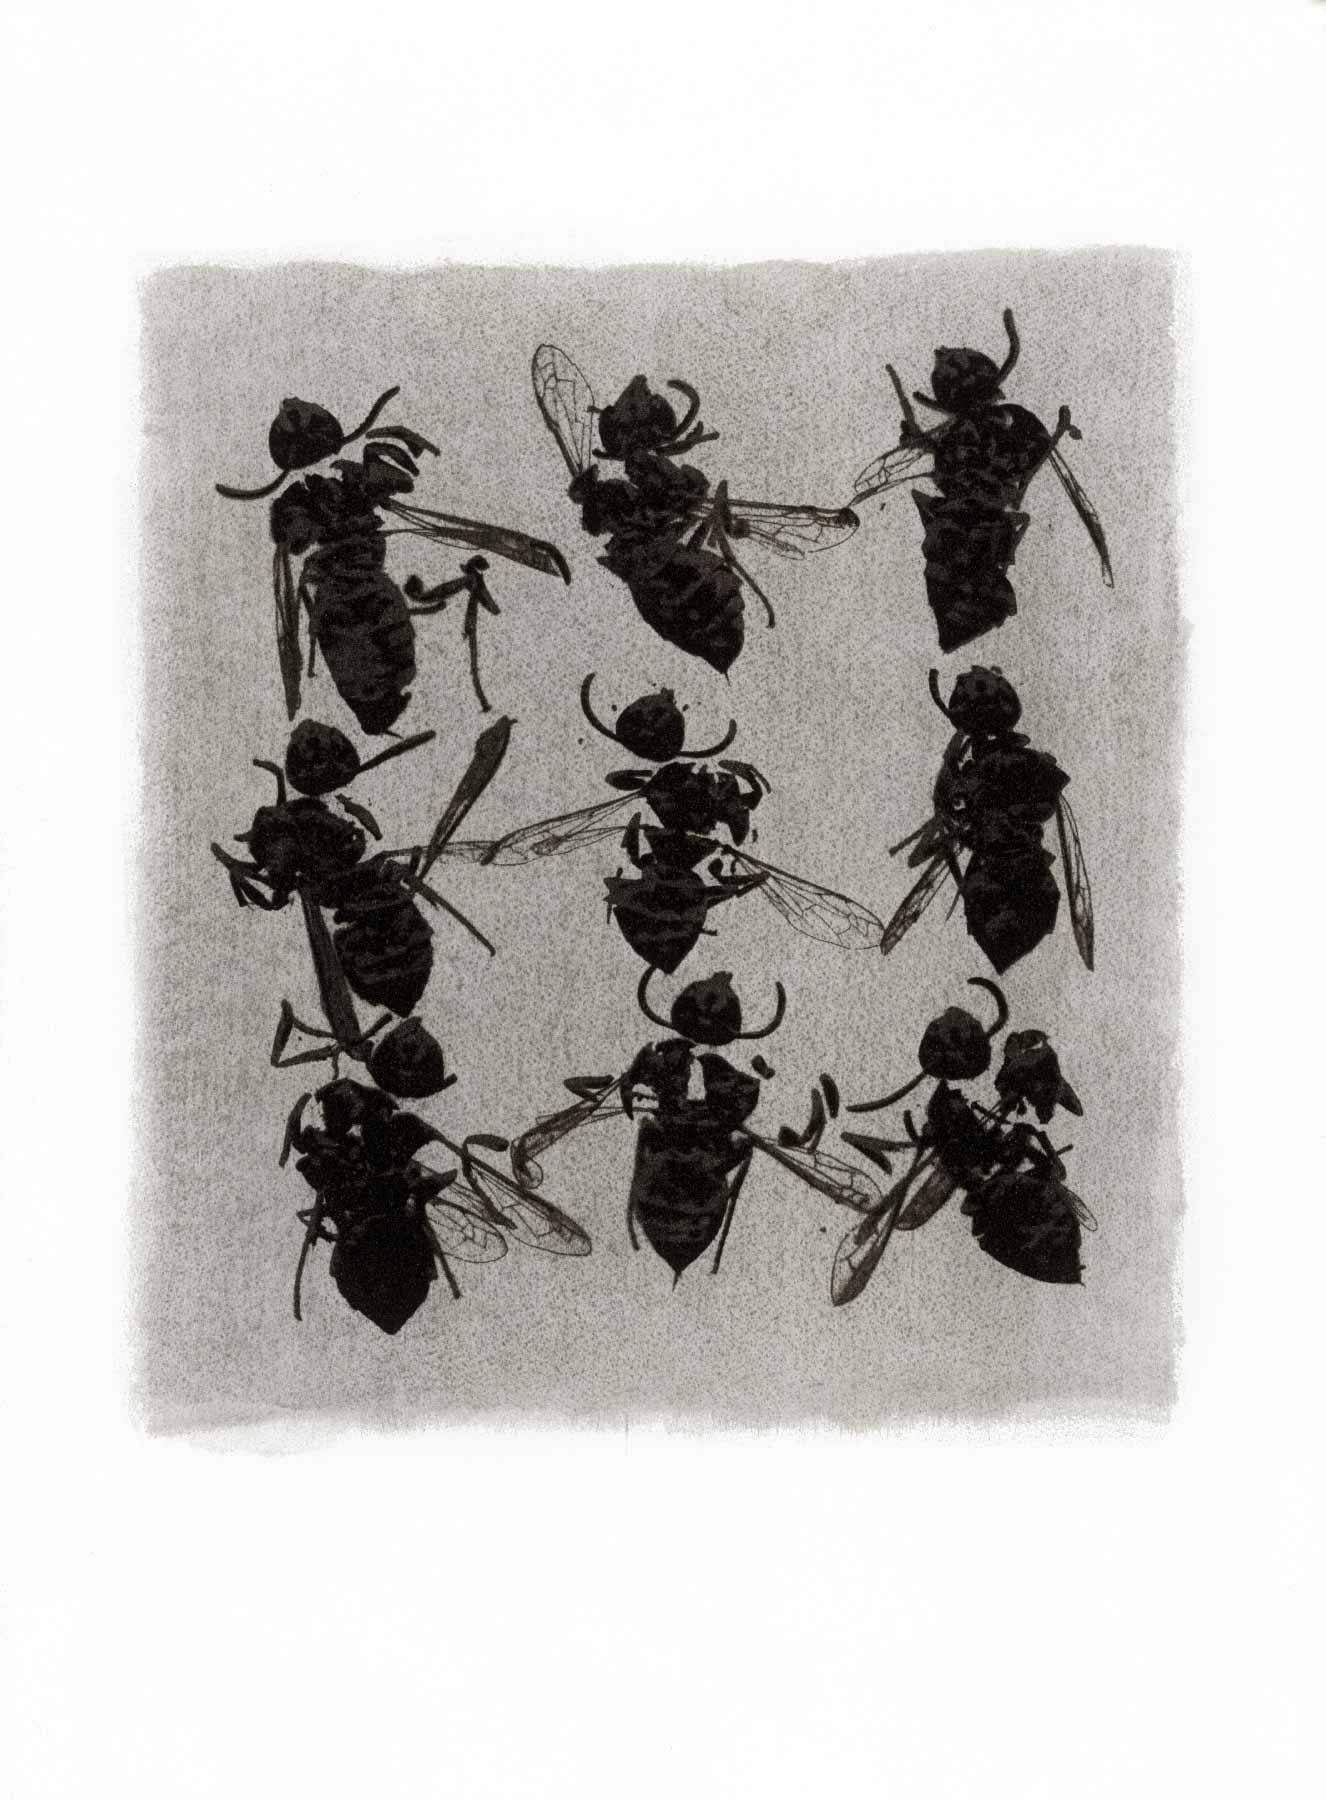 Gum bichromate insect - Wasps 1994